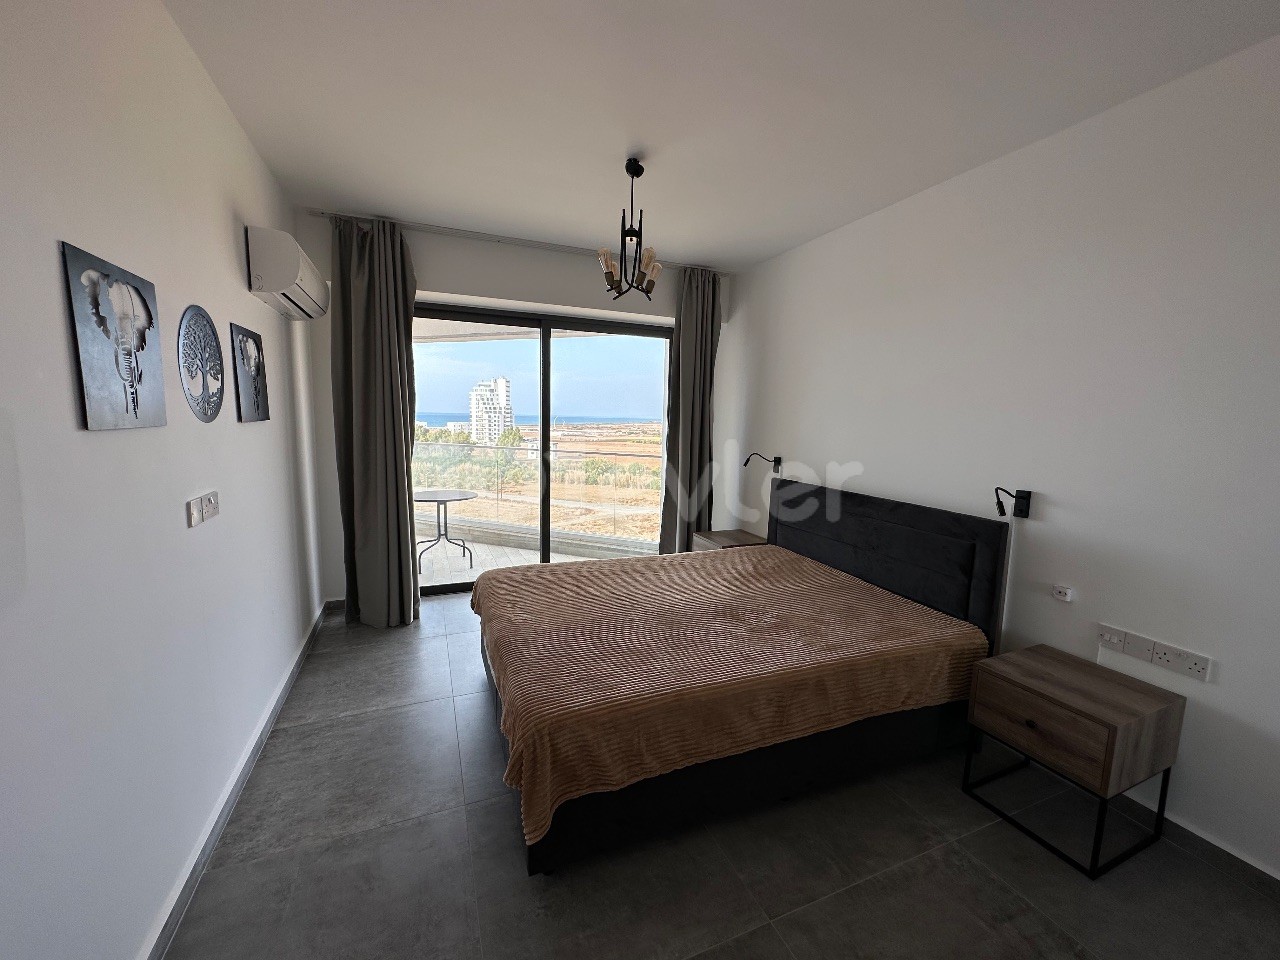 1 bedroom apartment with a sea view 